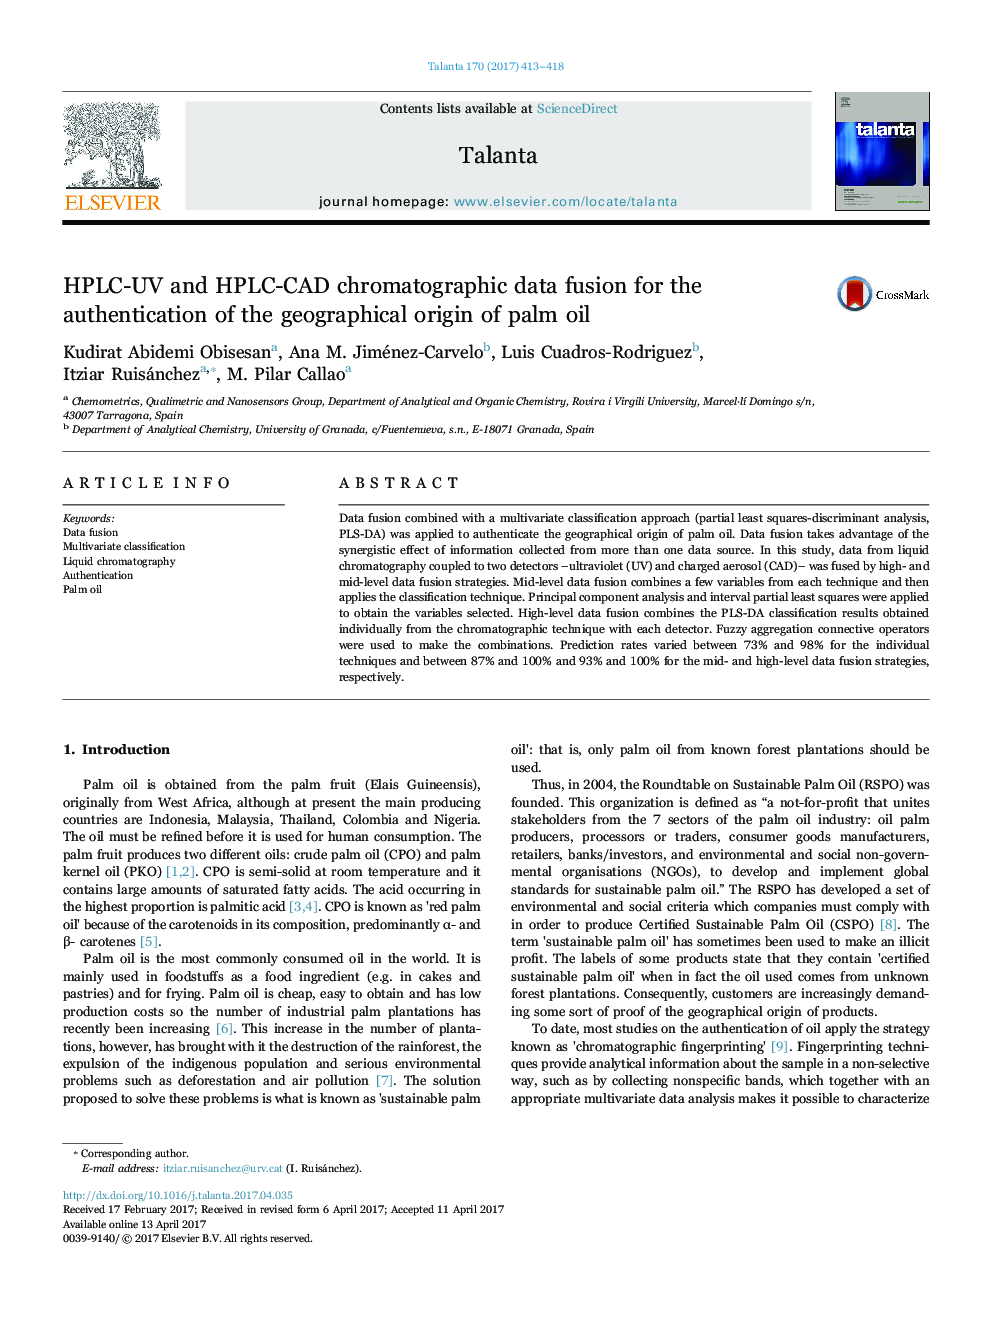 HPLC-UV and HPLC-CAD chromatographic data fusion for the authentication of the geographical origin of palm oil